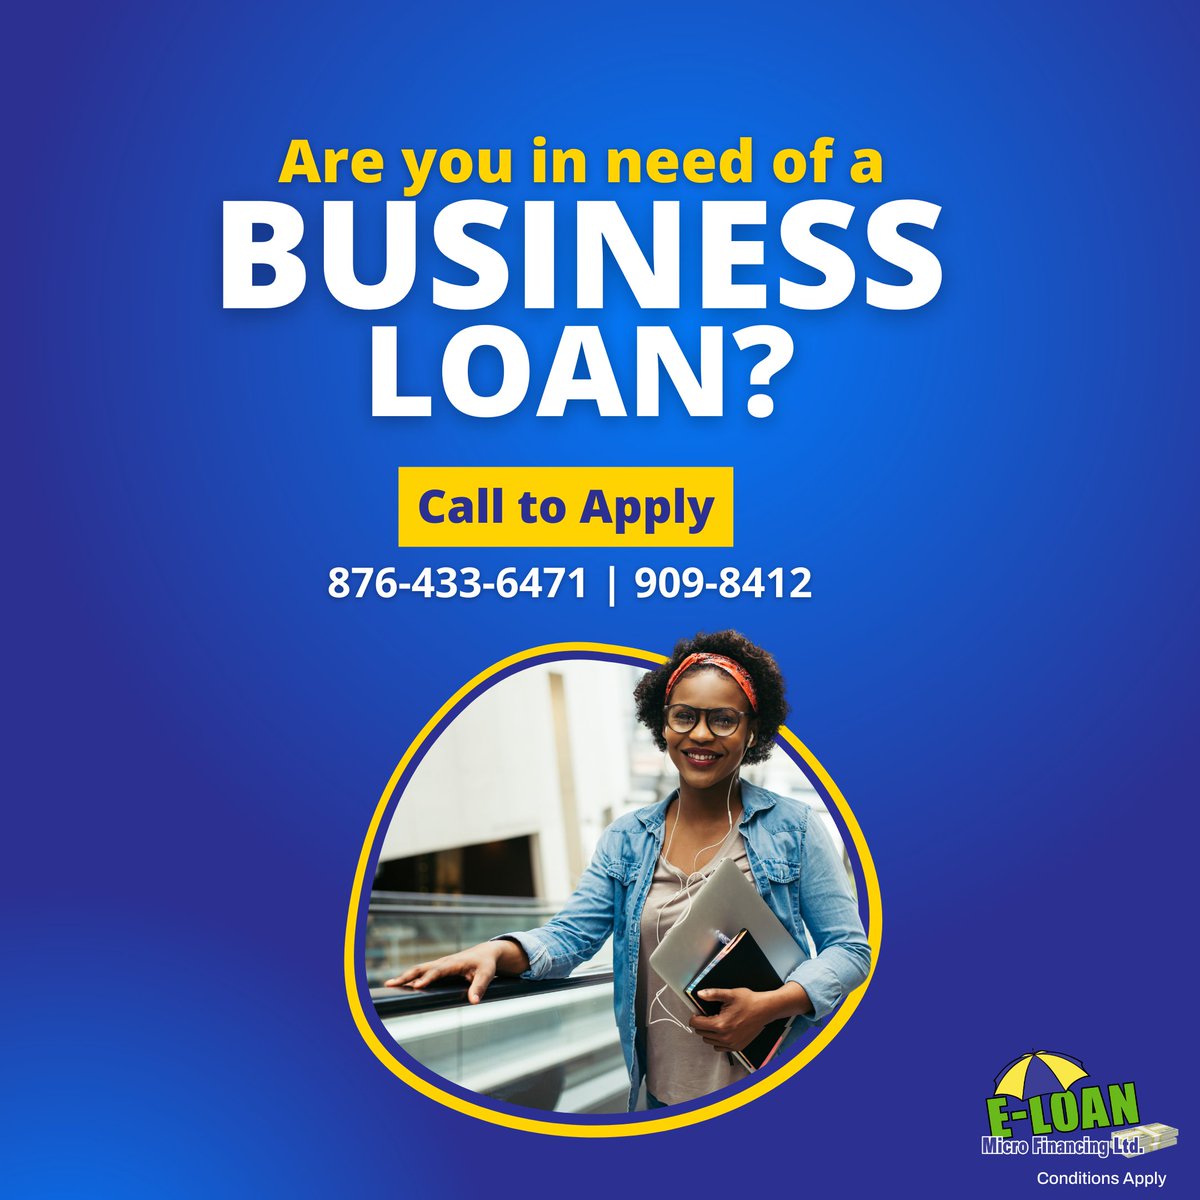 💰 Need funding to fuel your dreams? Look no further! Call now to apply for a business loan and take your venture to new heights. 🚀

#EloanMFLimited #MontegoBayBusinessLoan #BusinessFunding #SmallBusinessLoan
#MontegoBayBusinessLoan #MontegoBay #jamaicaloancompany